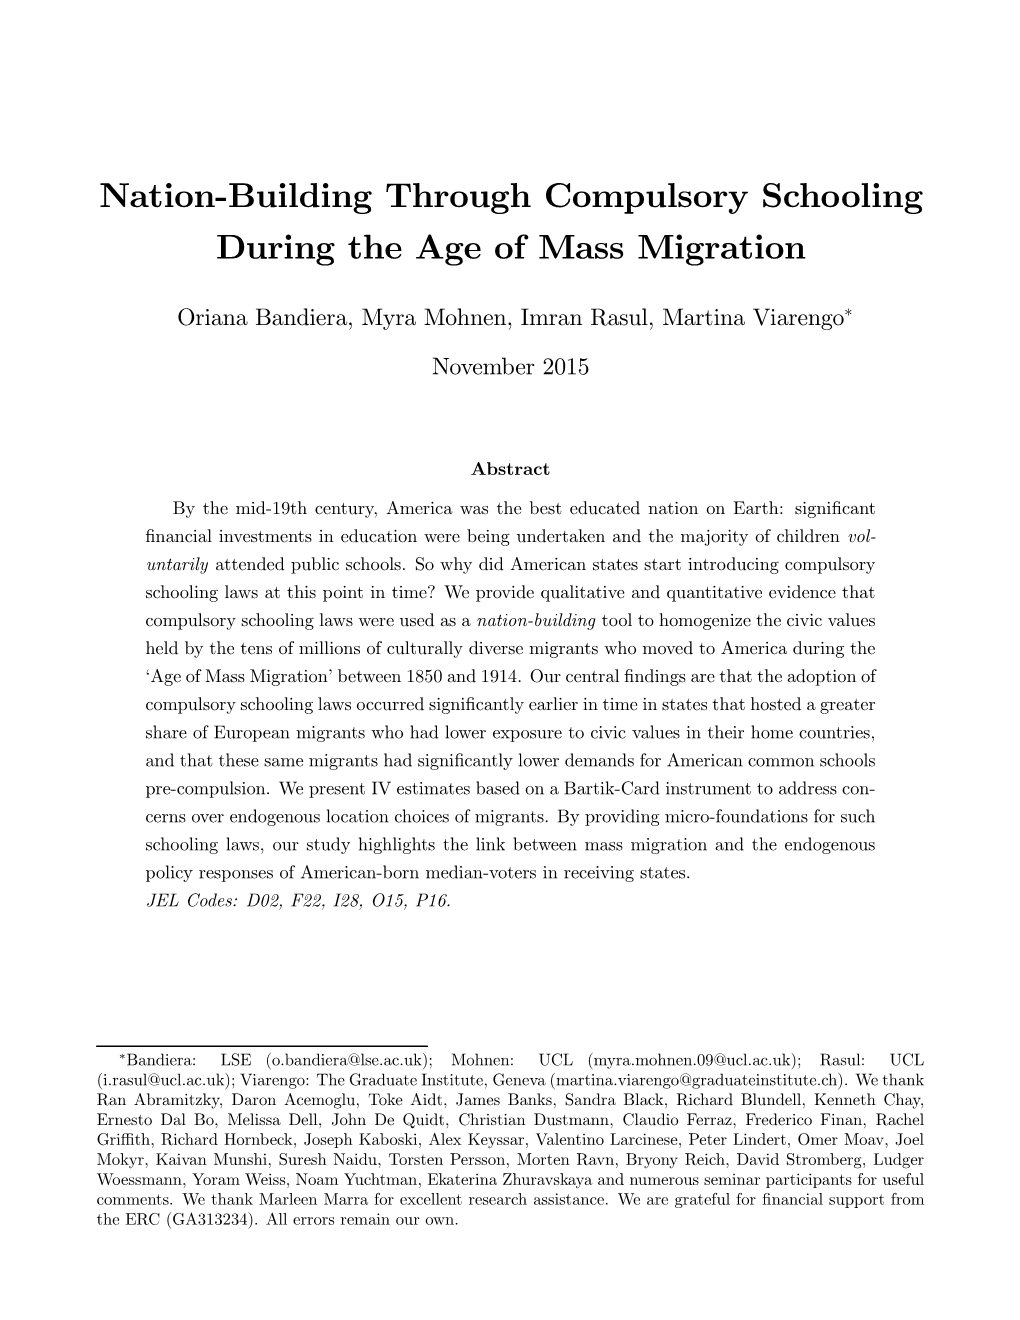 Nation-Building Through Compulsory Schooling During the Age of Mass Migration